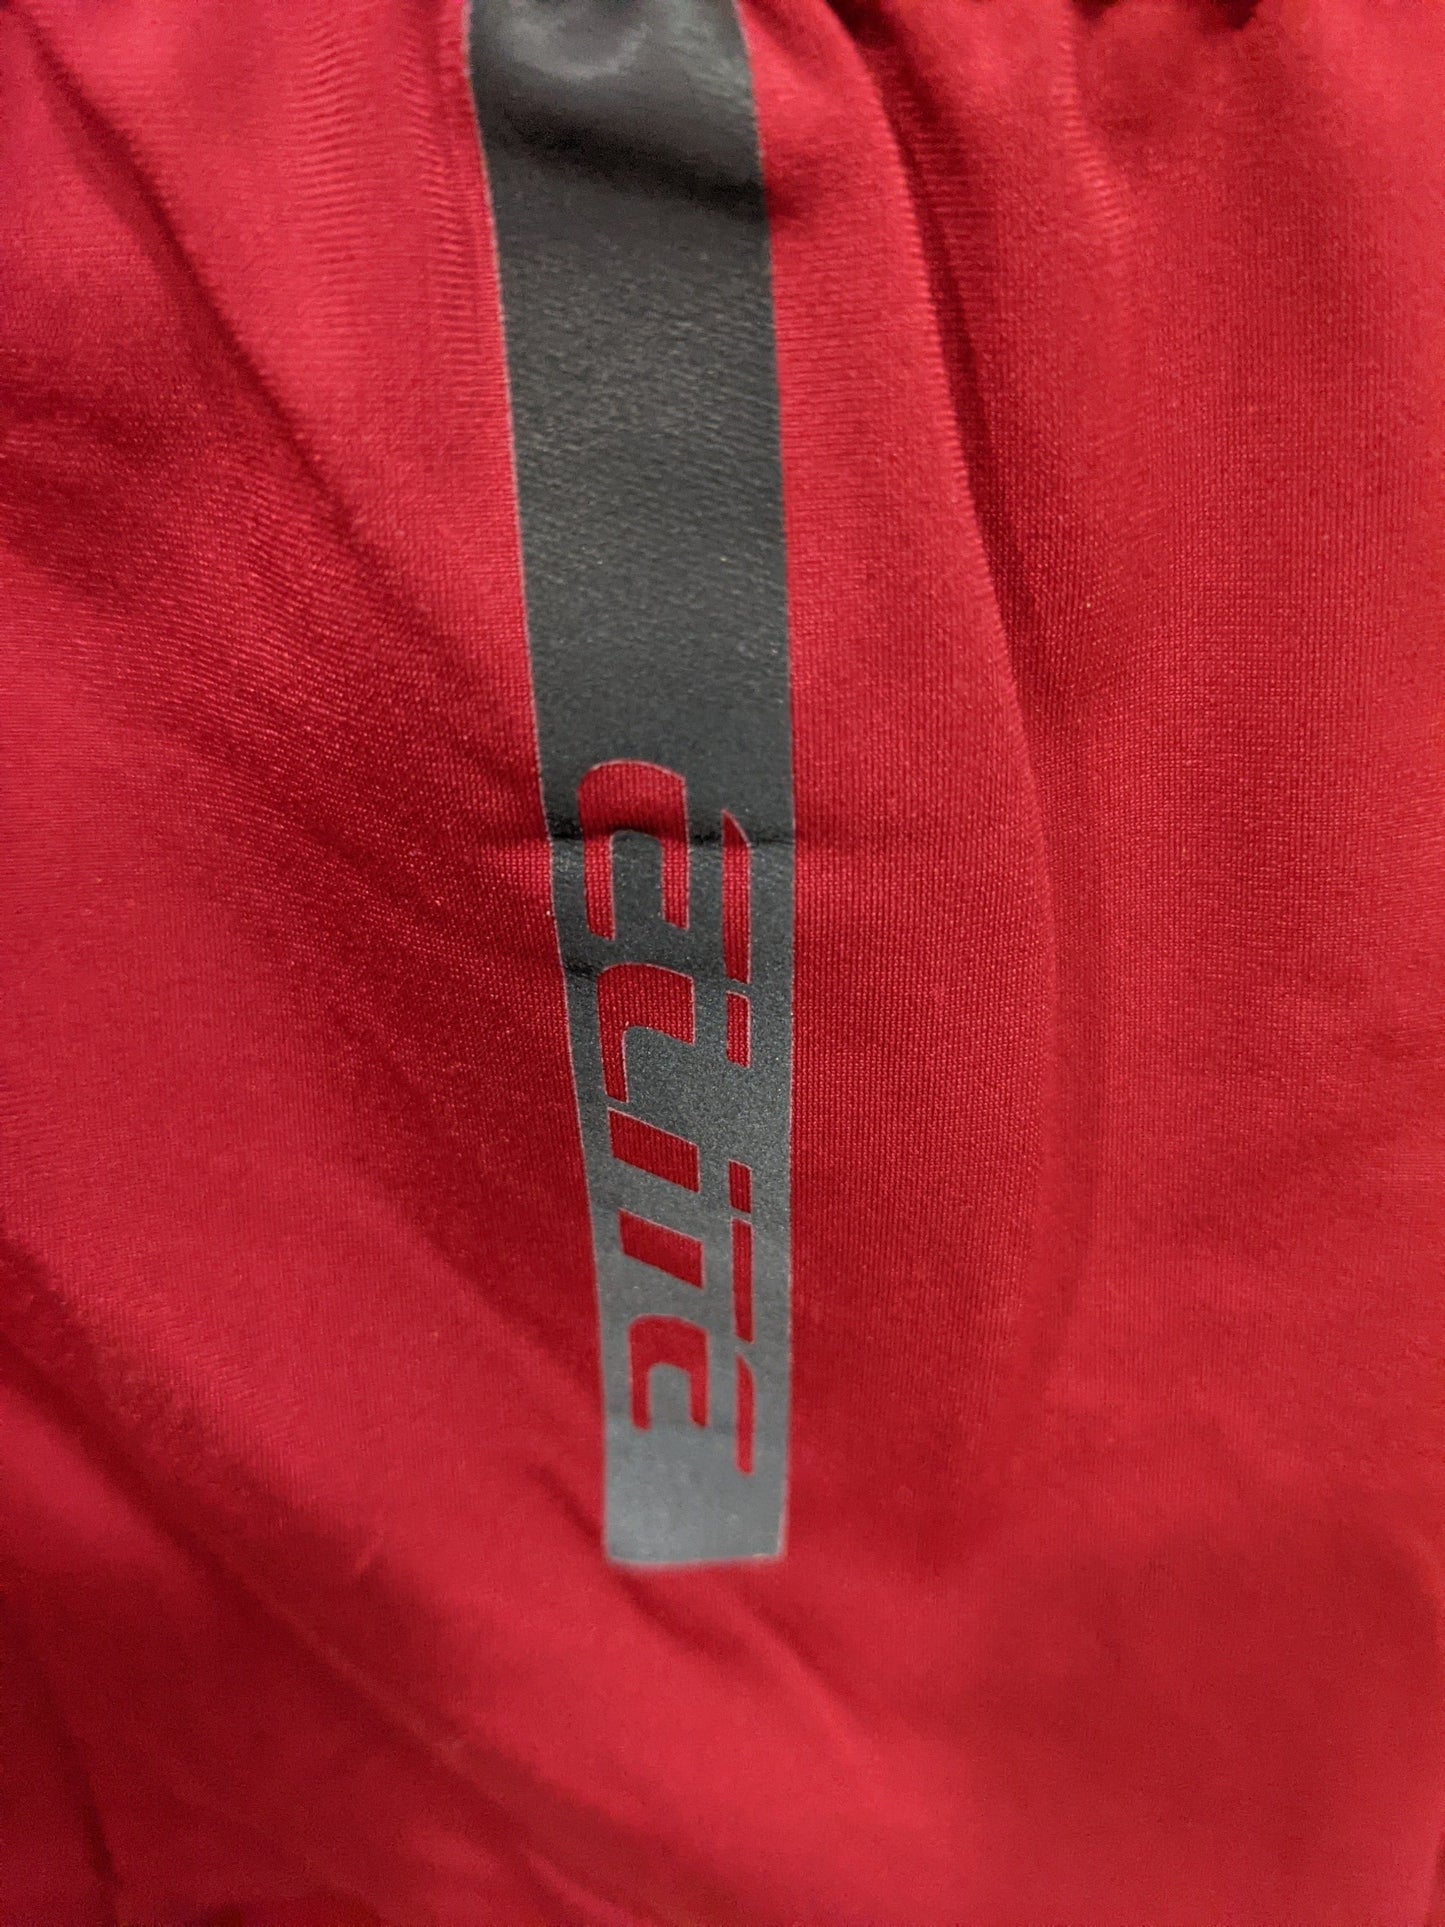 Performance Bicycle Jacket Elite Krio Red New Clearance